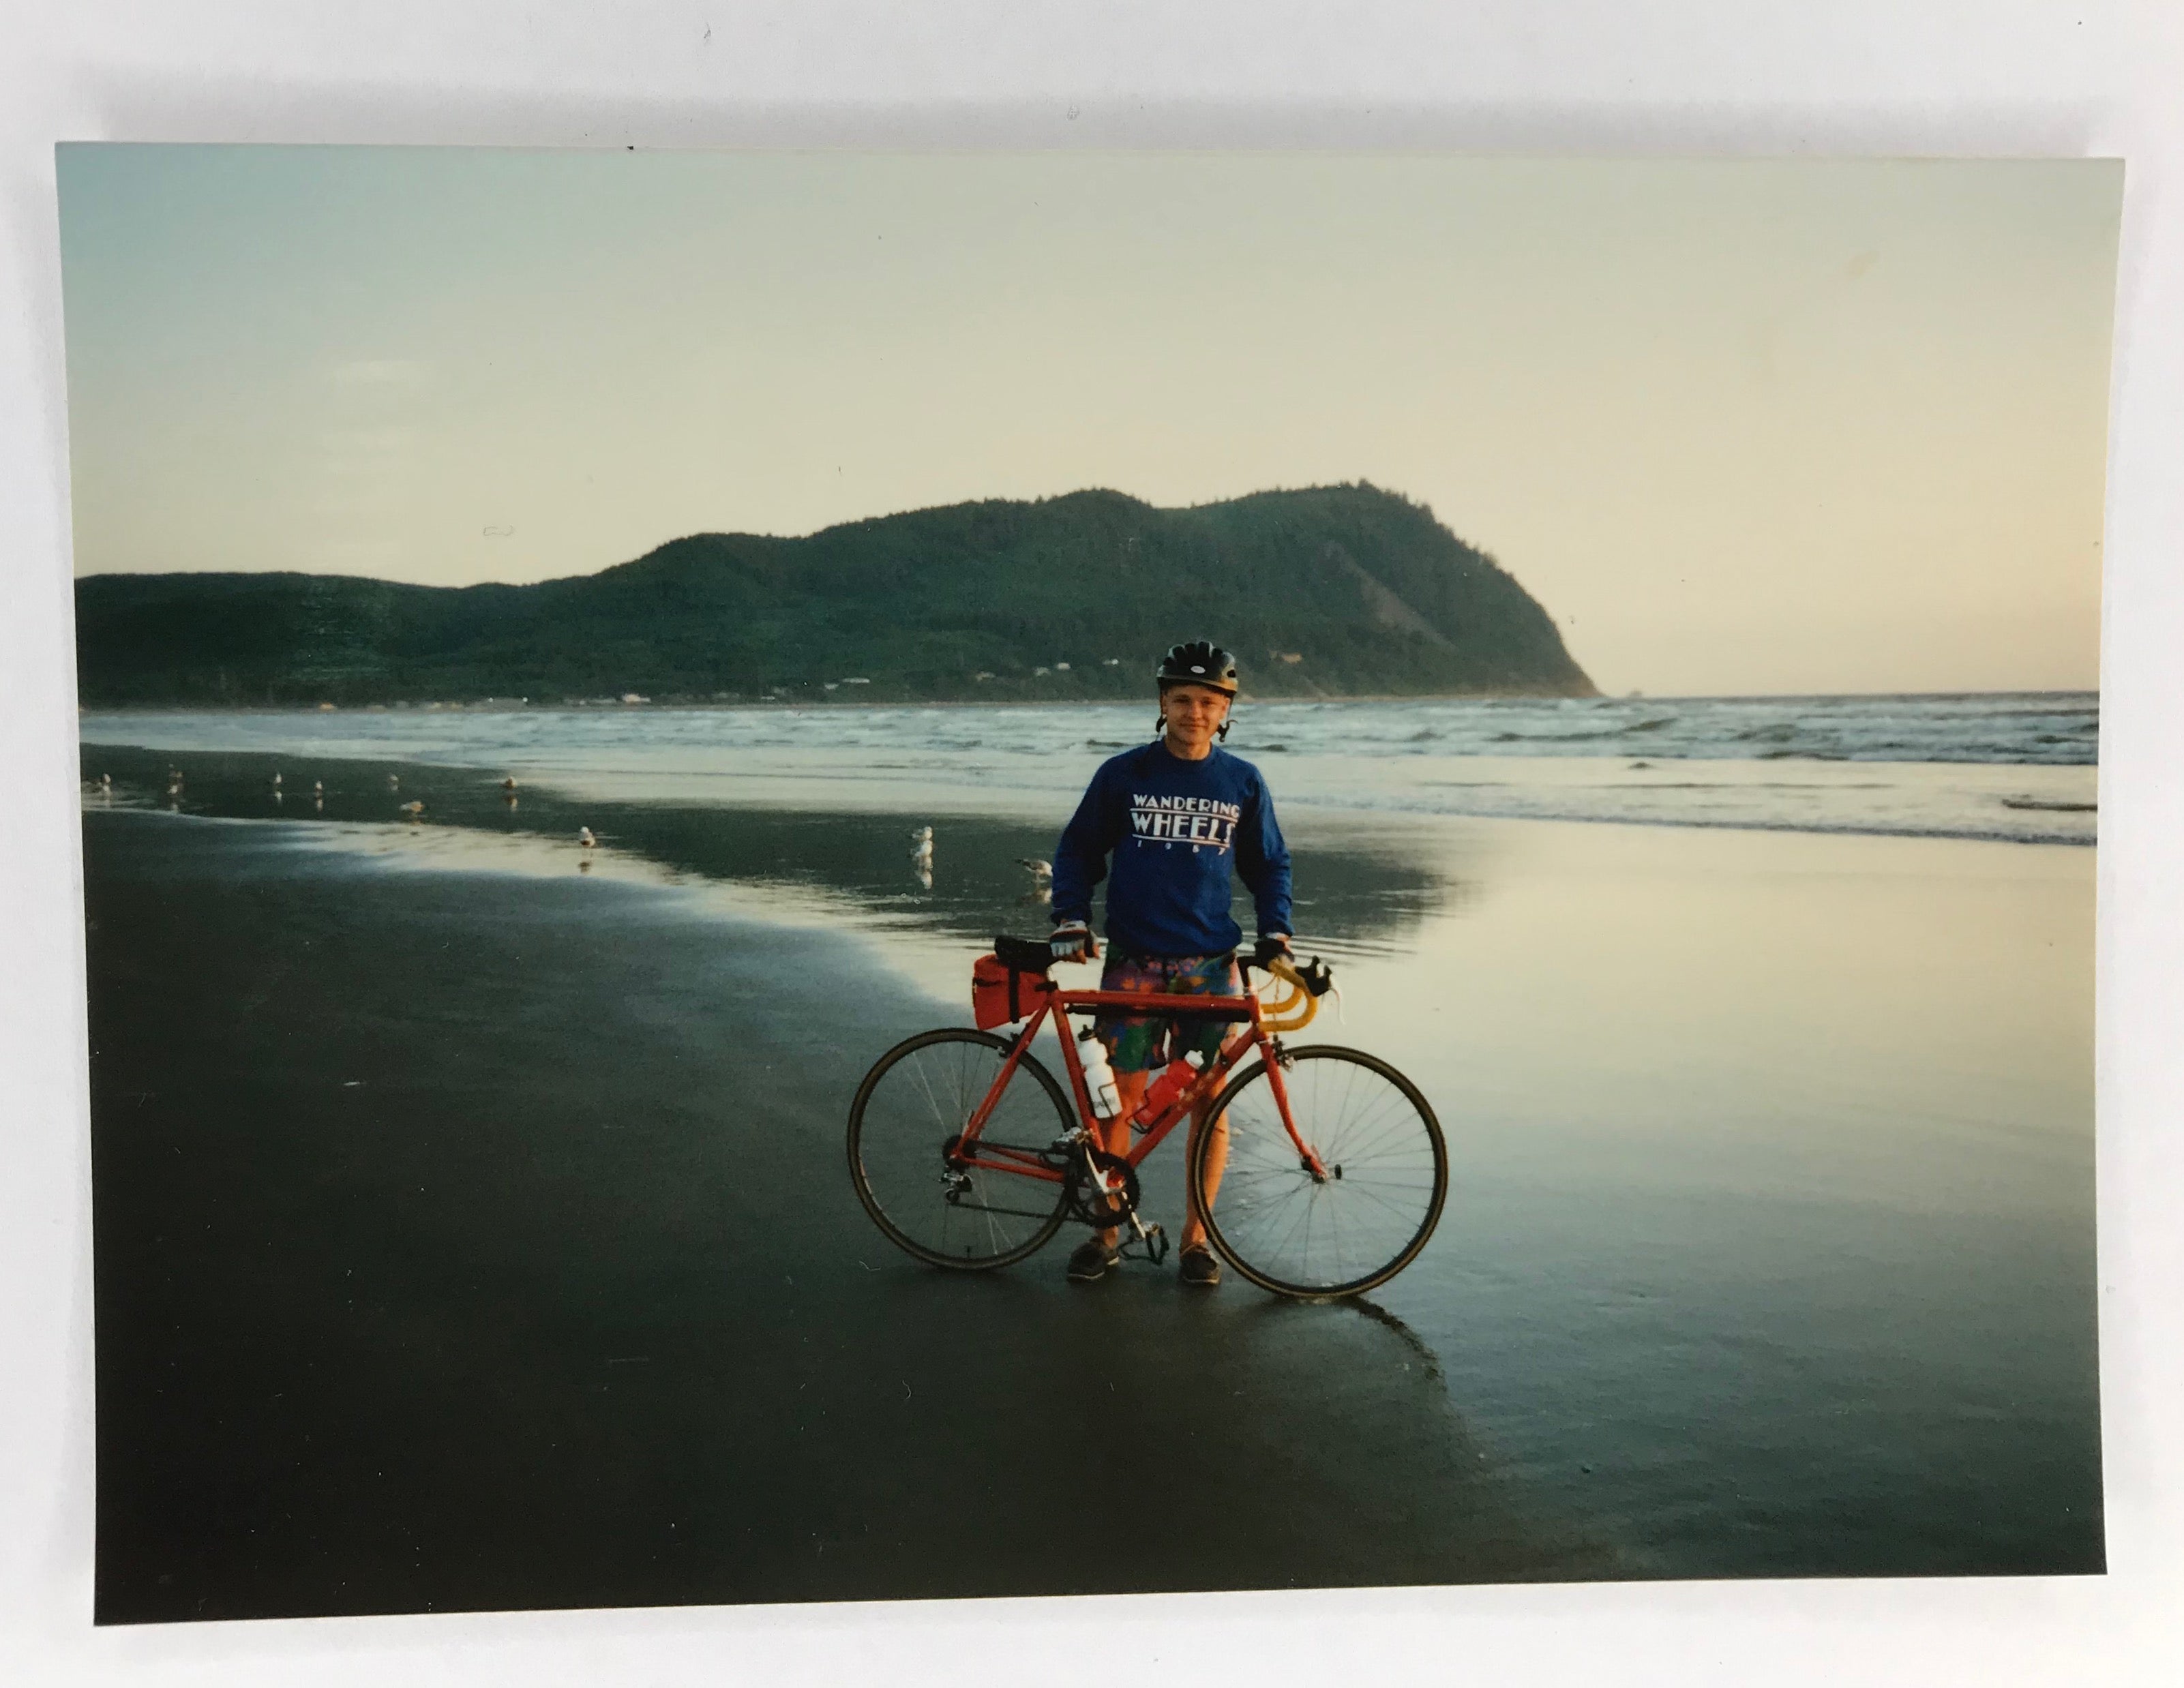 ic: Seaside Oregon, the evening before the cross country ride started